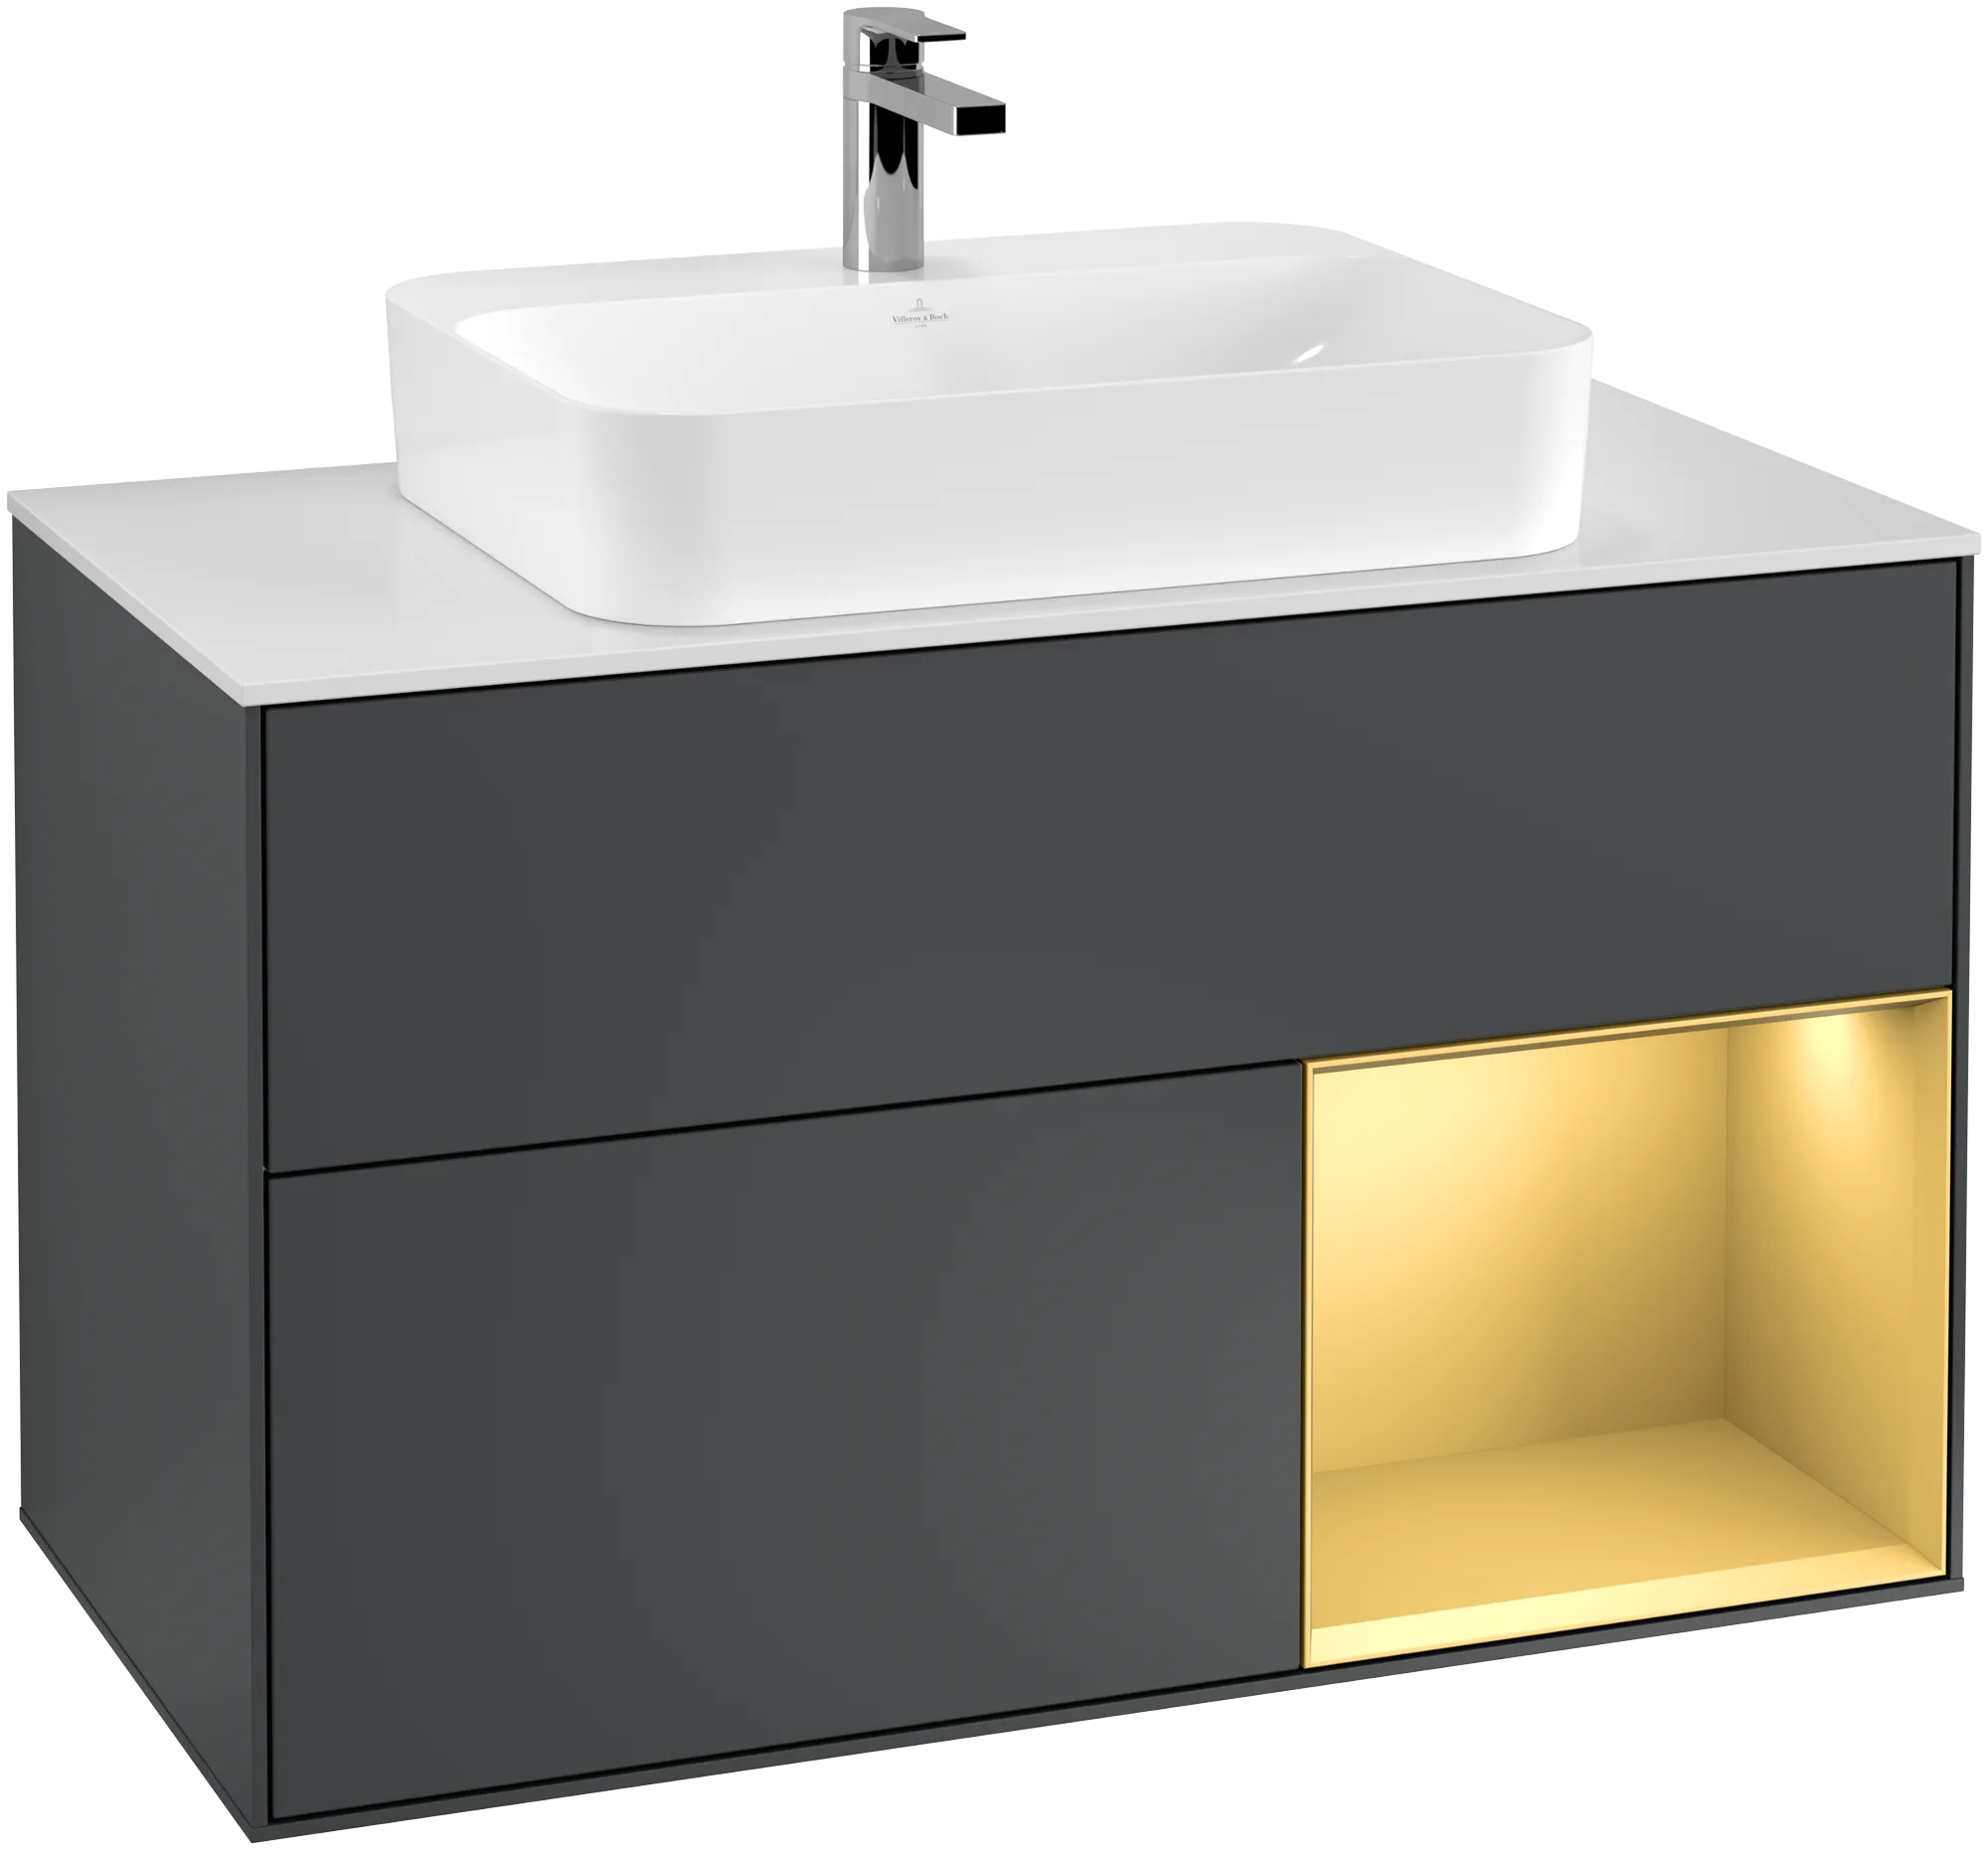 Picture of VILLEROY BOCH Finion Vanity unit, with lighting, 2 pull-out compartments, 1000 x 603 x 501 mm, Midnight Blue Matt Lacquer / Gold Matt Lacquer / Glass White Matt #G371HFHG